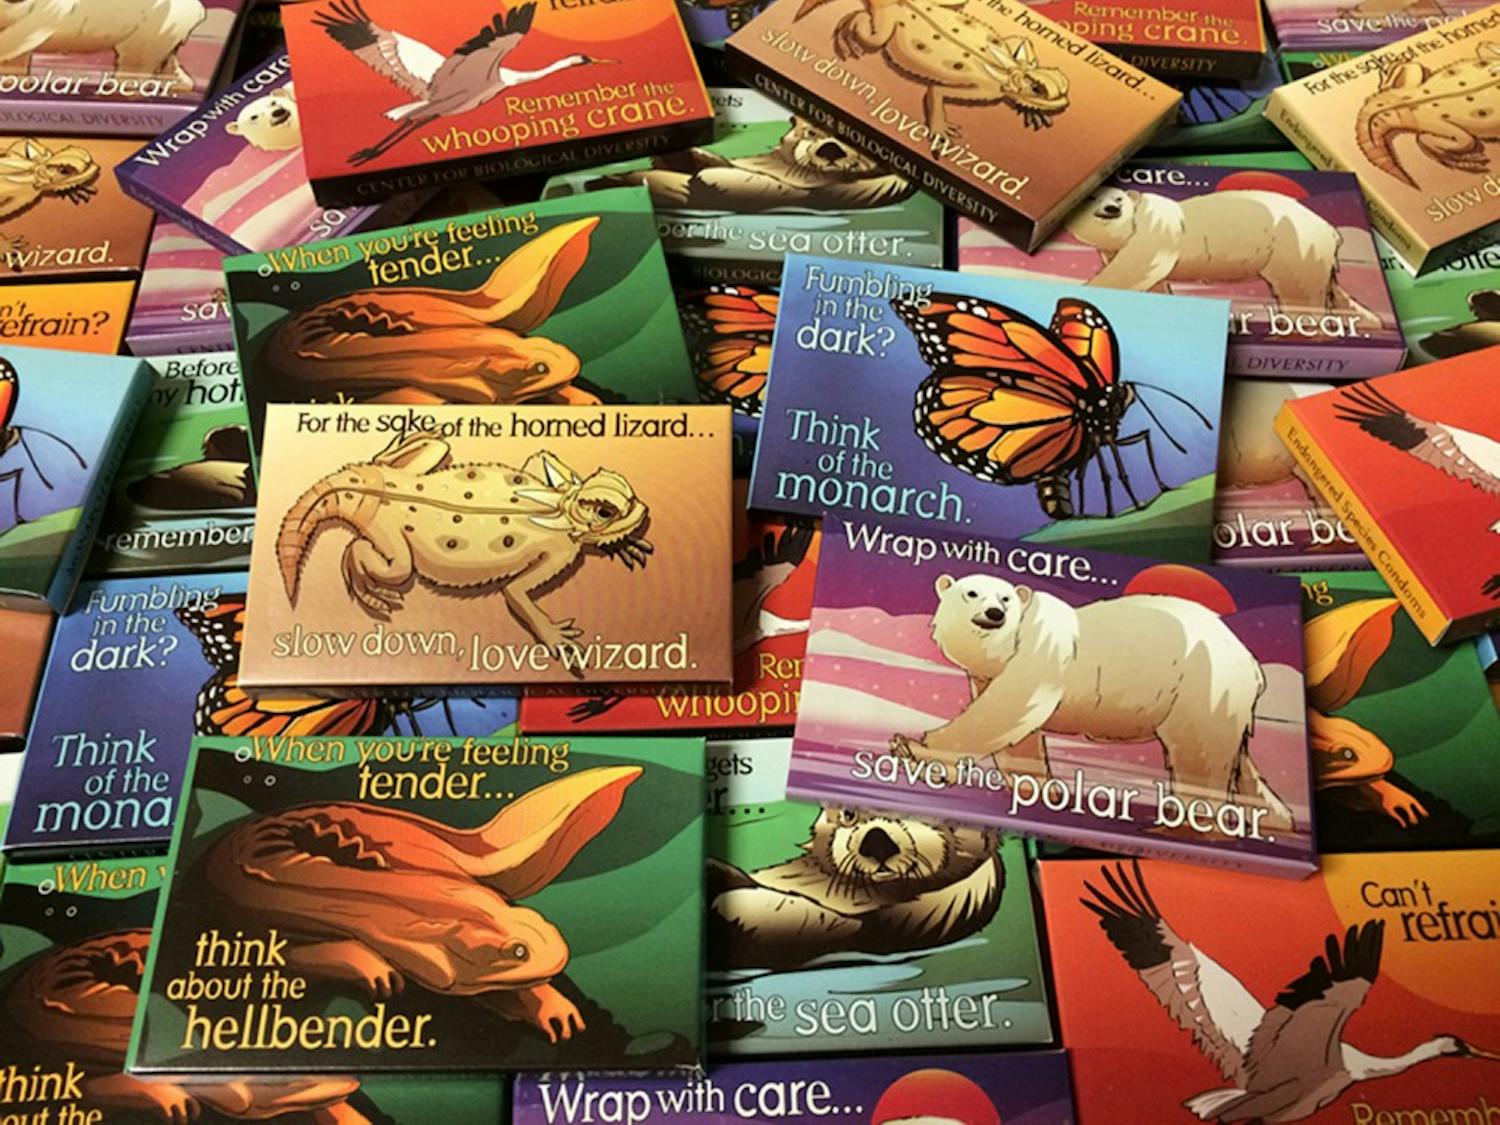 The Center for Biological Diversity sent the city of Durham 40,000 condoms for Valentine's Day in an effort to raise awareness for wildlife conservation. Durham was named one of the U.S.'s most "sex-crazed" cities. Photo courtesy of the Center for Biological Diversity.&nbsp;